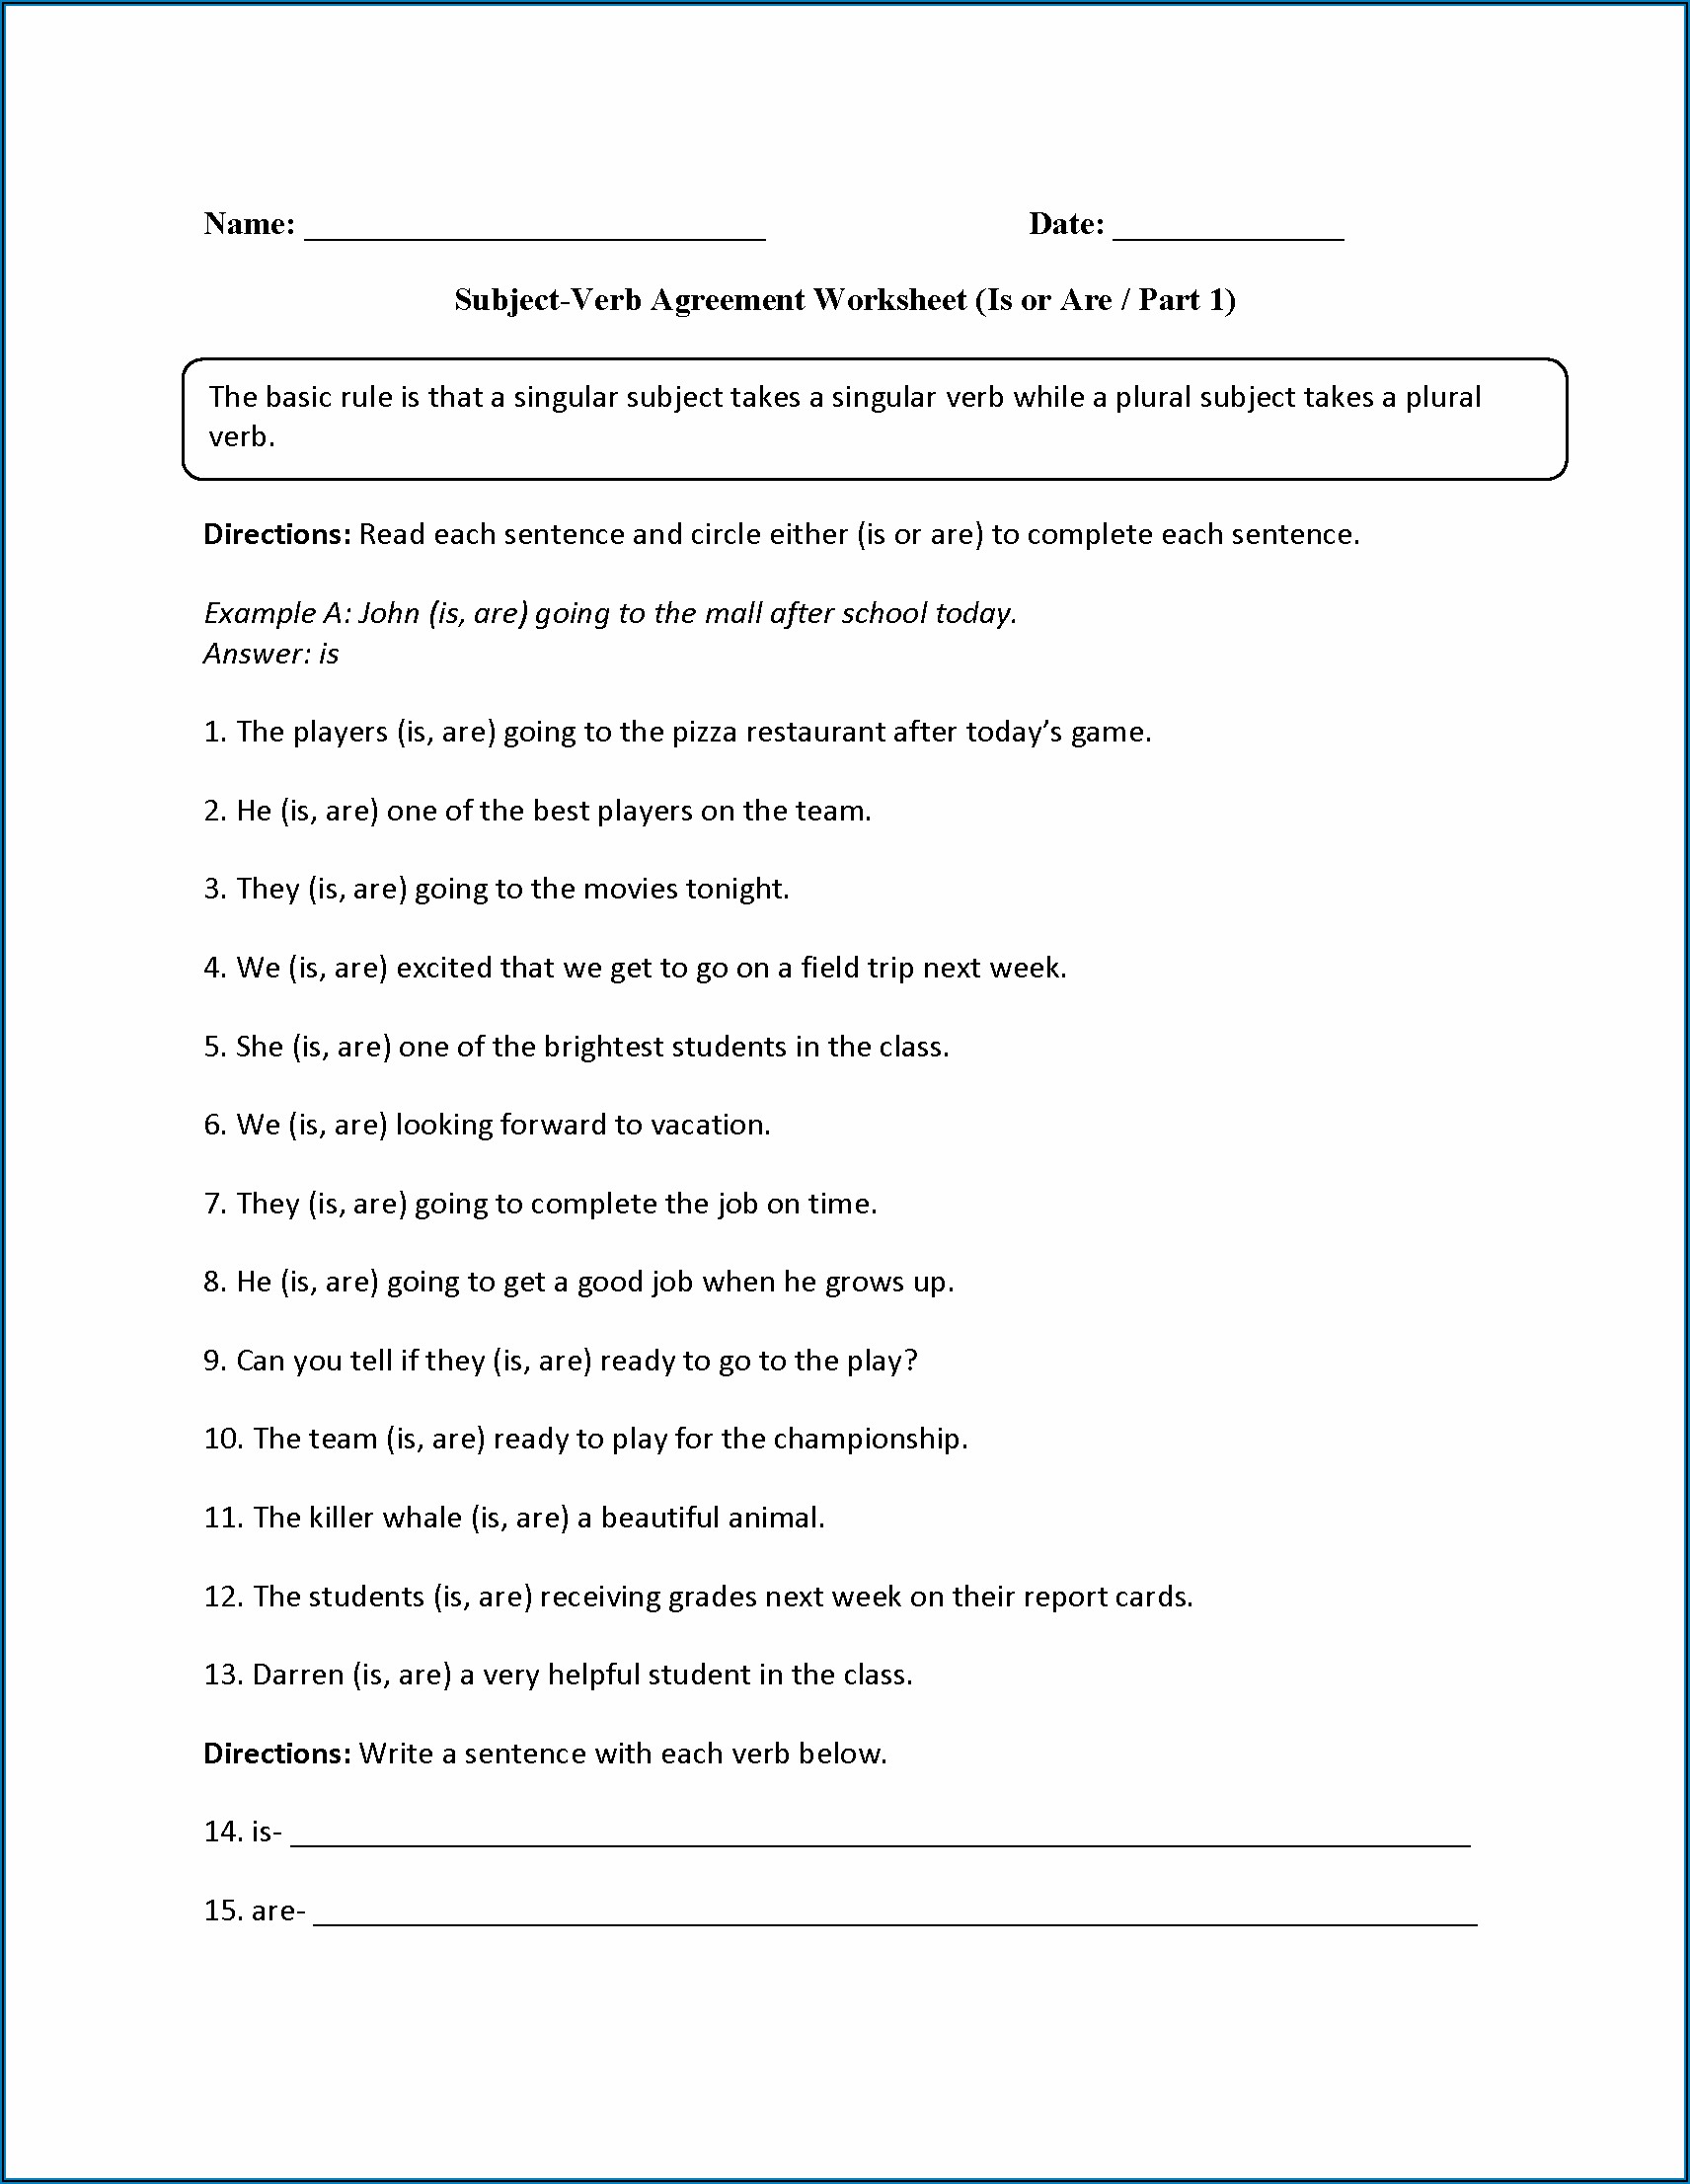 Subject Verb Agreement Worksheets Grade 6 With Answer Key Pdf